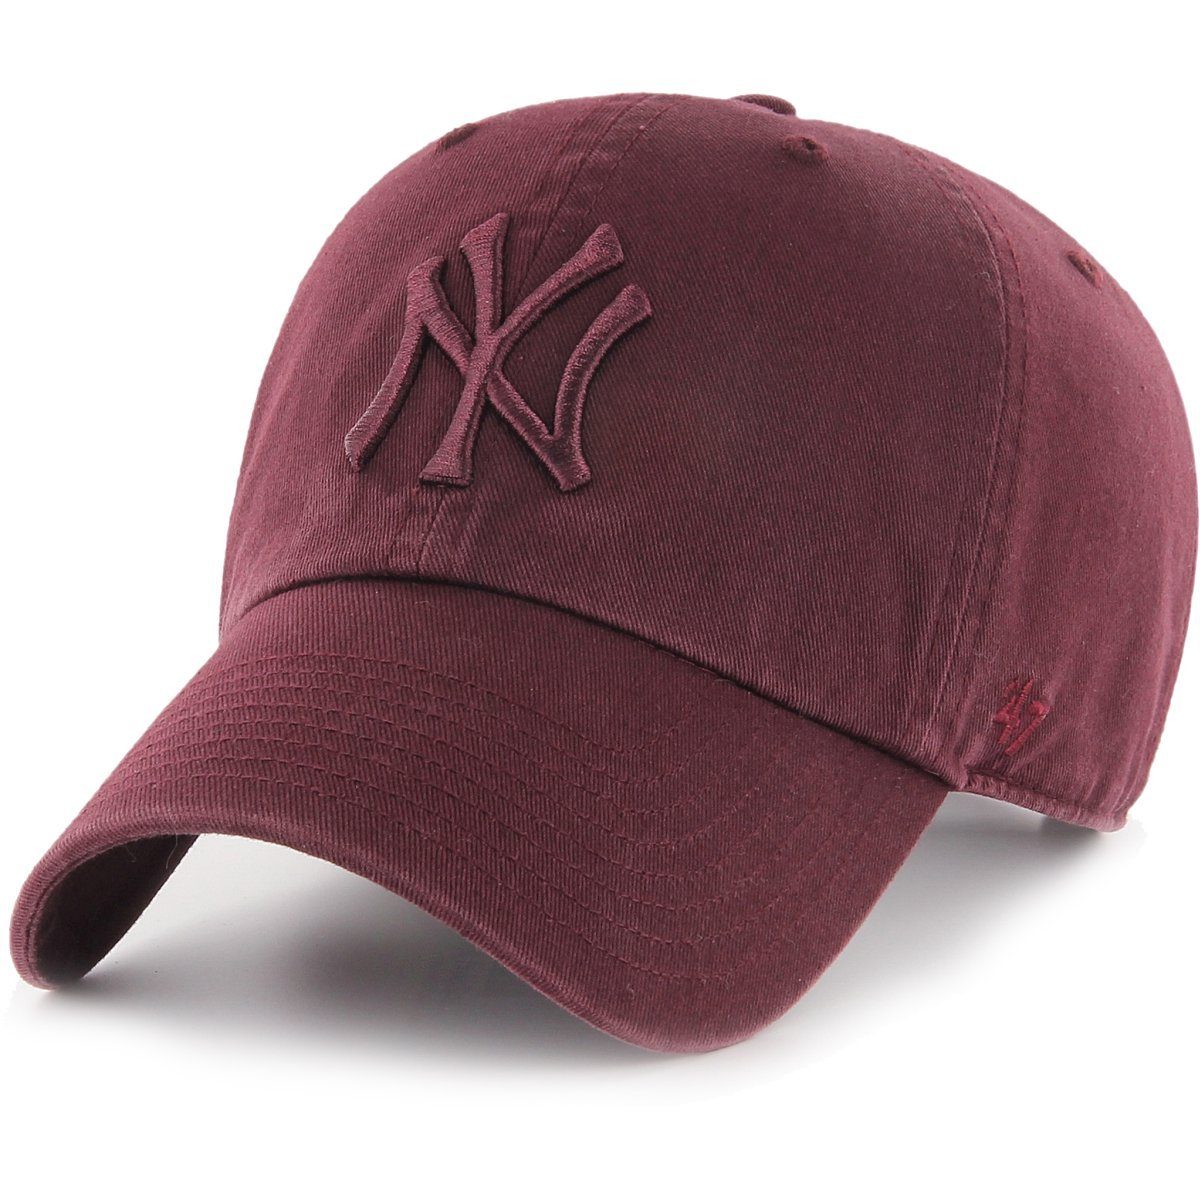 '47 Brand Baseball Cap Relaxed Fit CLEAN UP NY Yankees dunkel